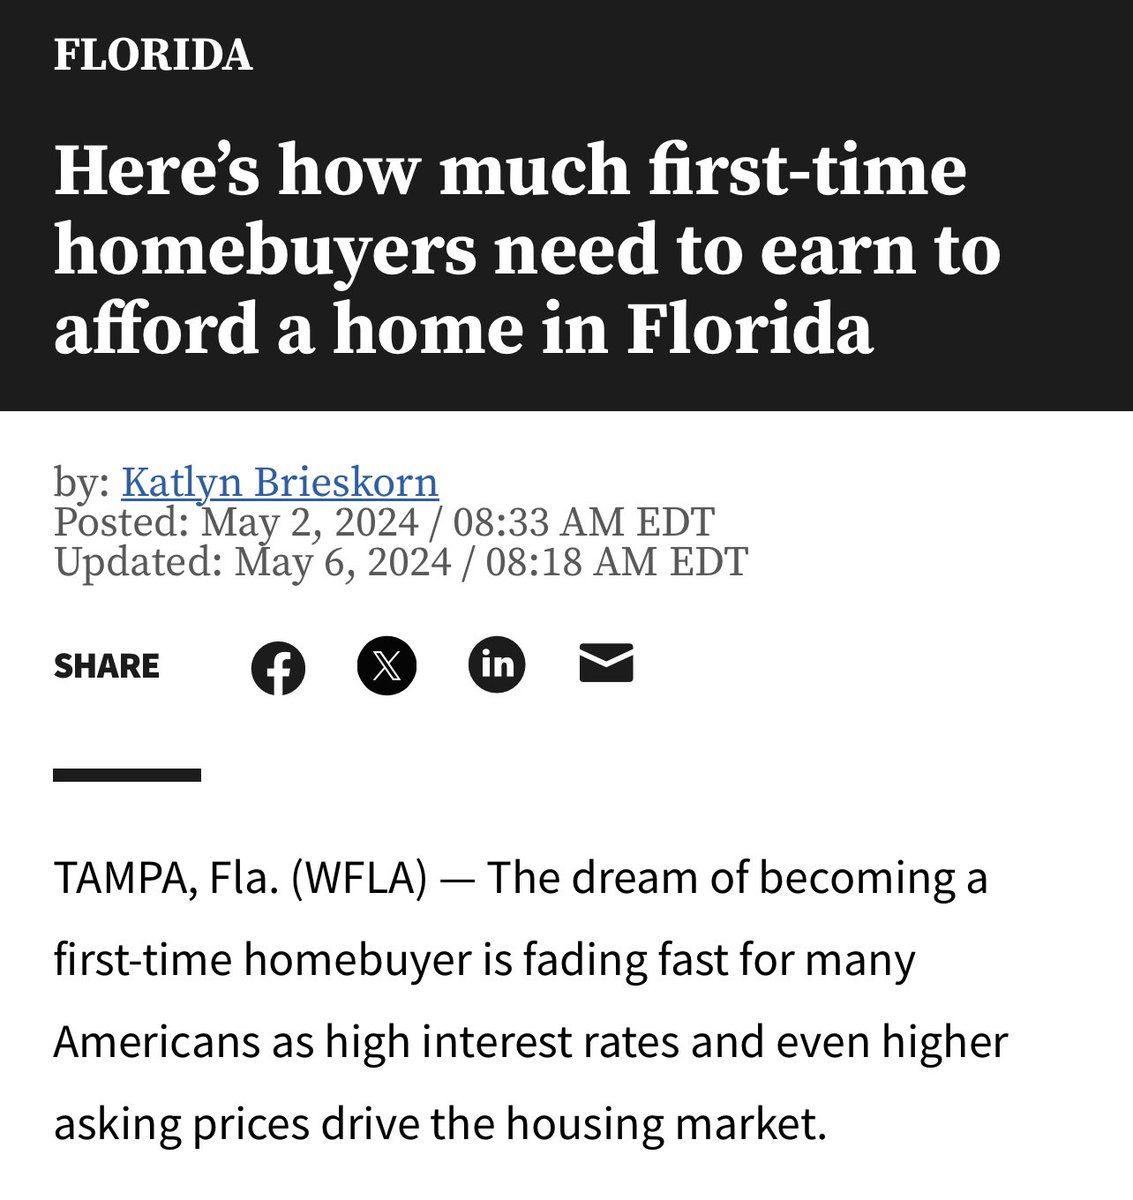 In Tampa Bay, a first-time homebuyer would need to earn $106,116 a year to afford the median home sale price of $361,177. However, the median household income is just $69,290. We need action on affordable housing NOW!

#AffordableHousing #FoxForCongress #Florida